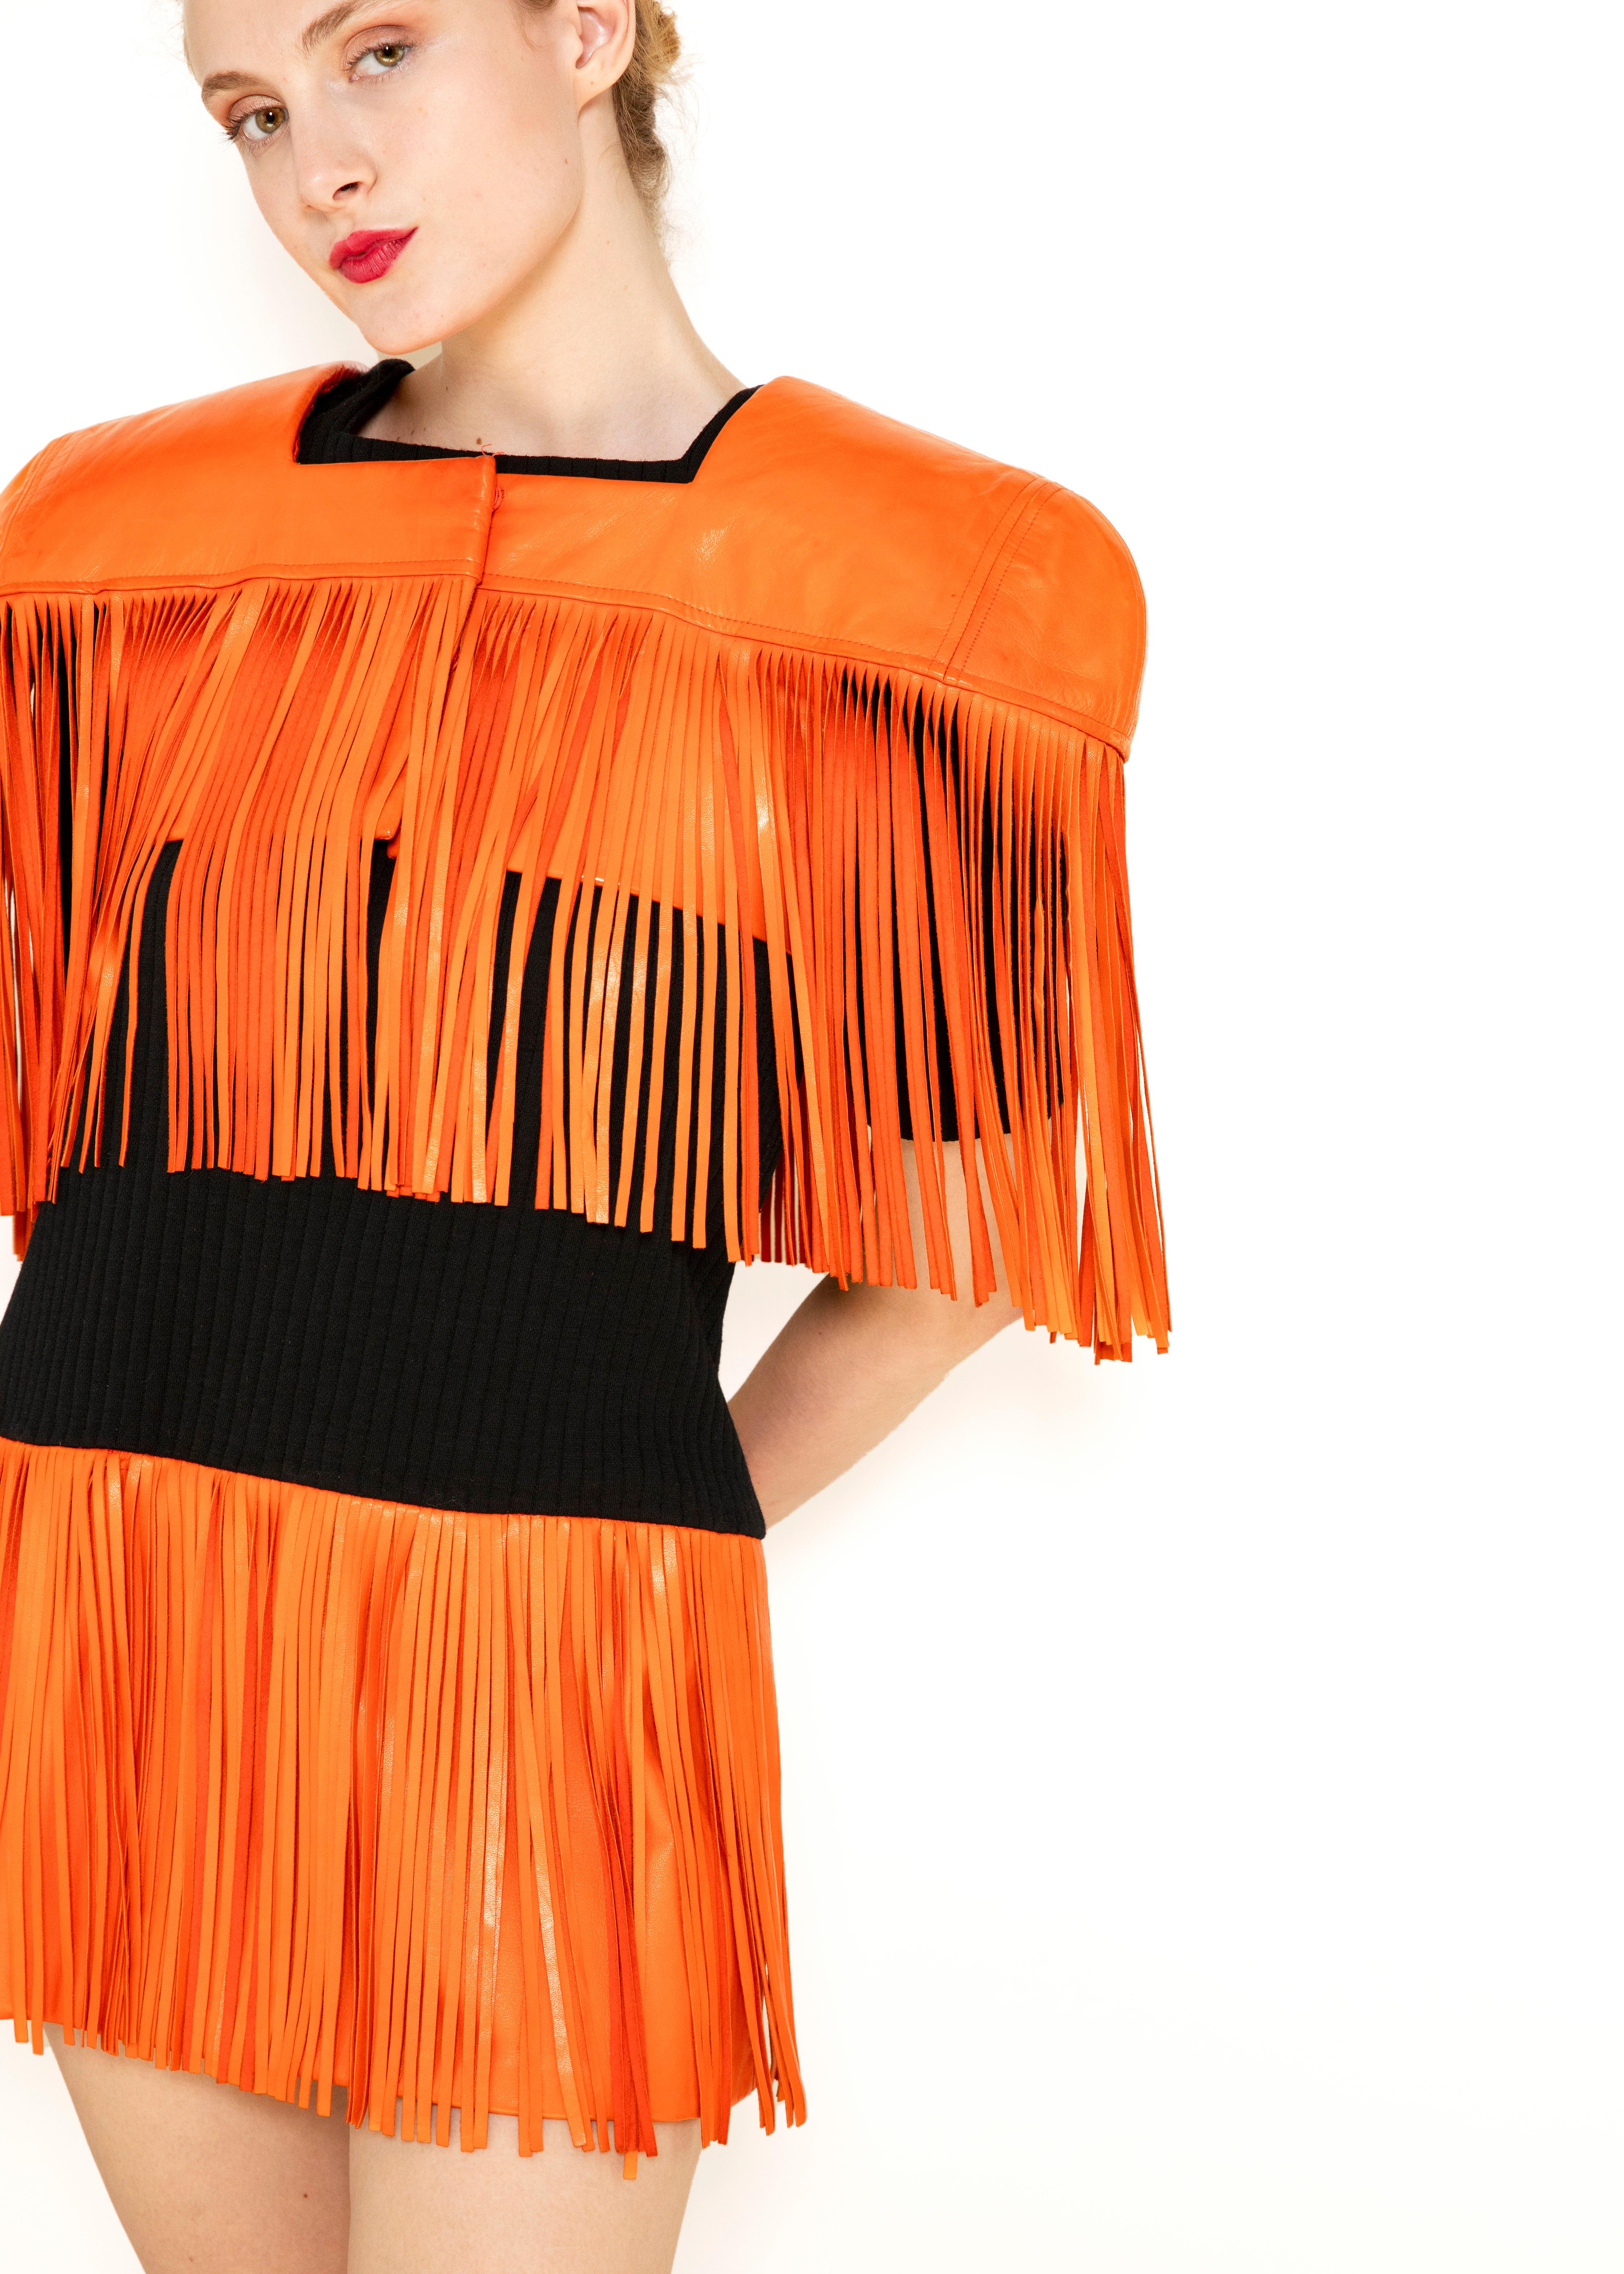 Unleash your inner risk-taker with the Paco Rabanne Leather Fringe Dress with Bolero. This bold dress features vibrant orange fringe and wide shoulders, perfect for making a statement. The micro dress is made of soft knit fabric, providing both